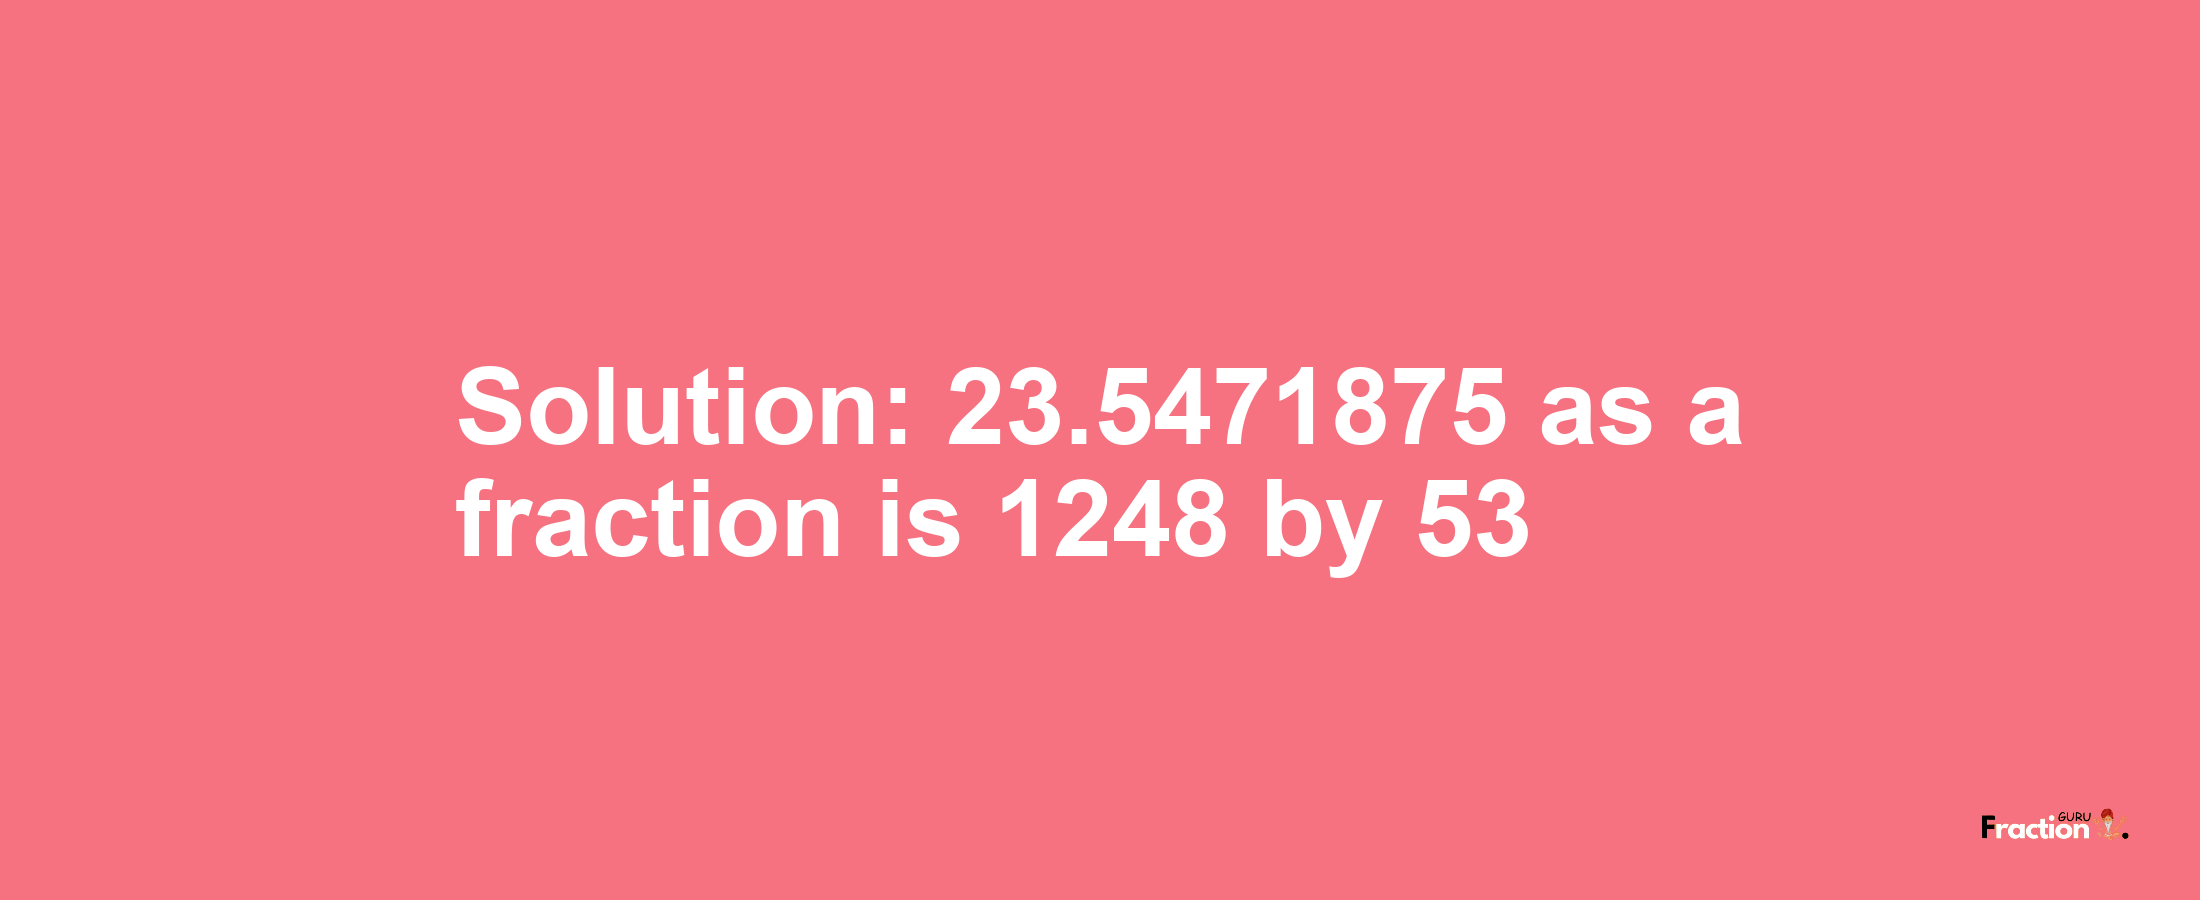 Solution:23.5471875 as a fraction is 1248/53